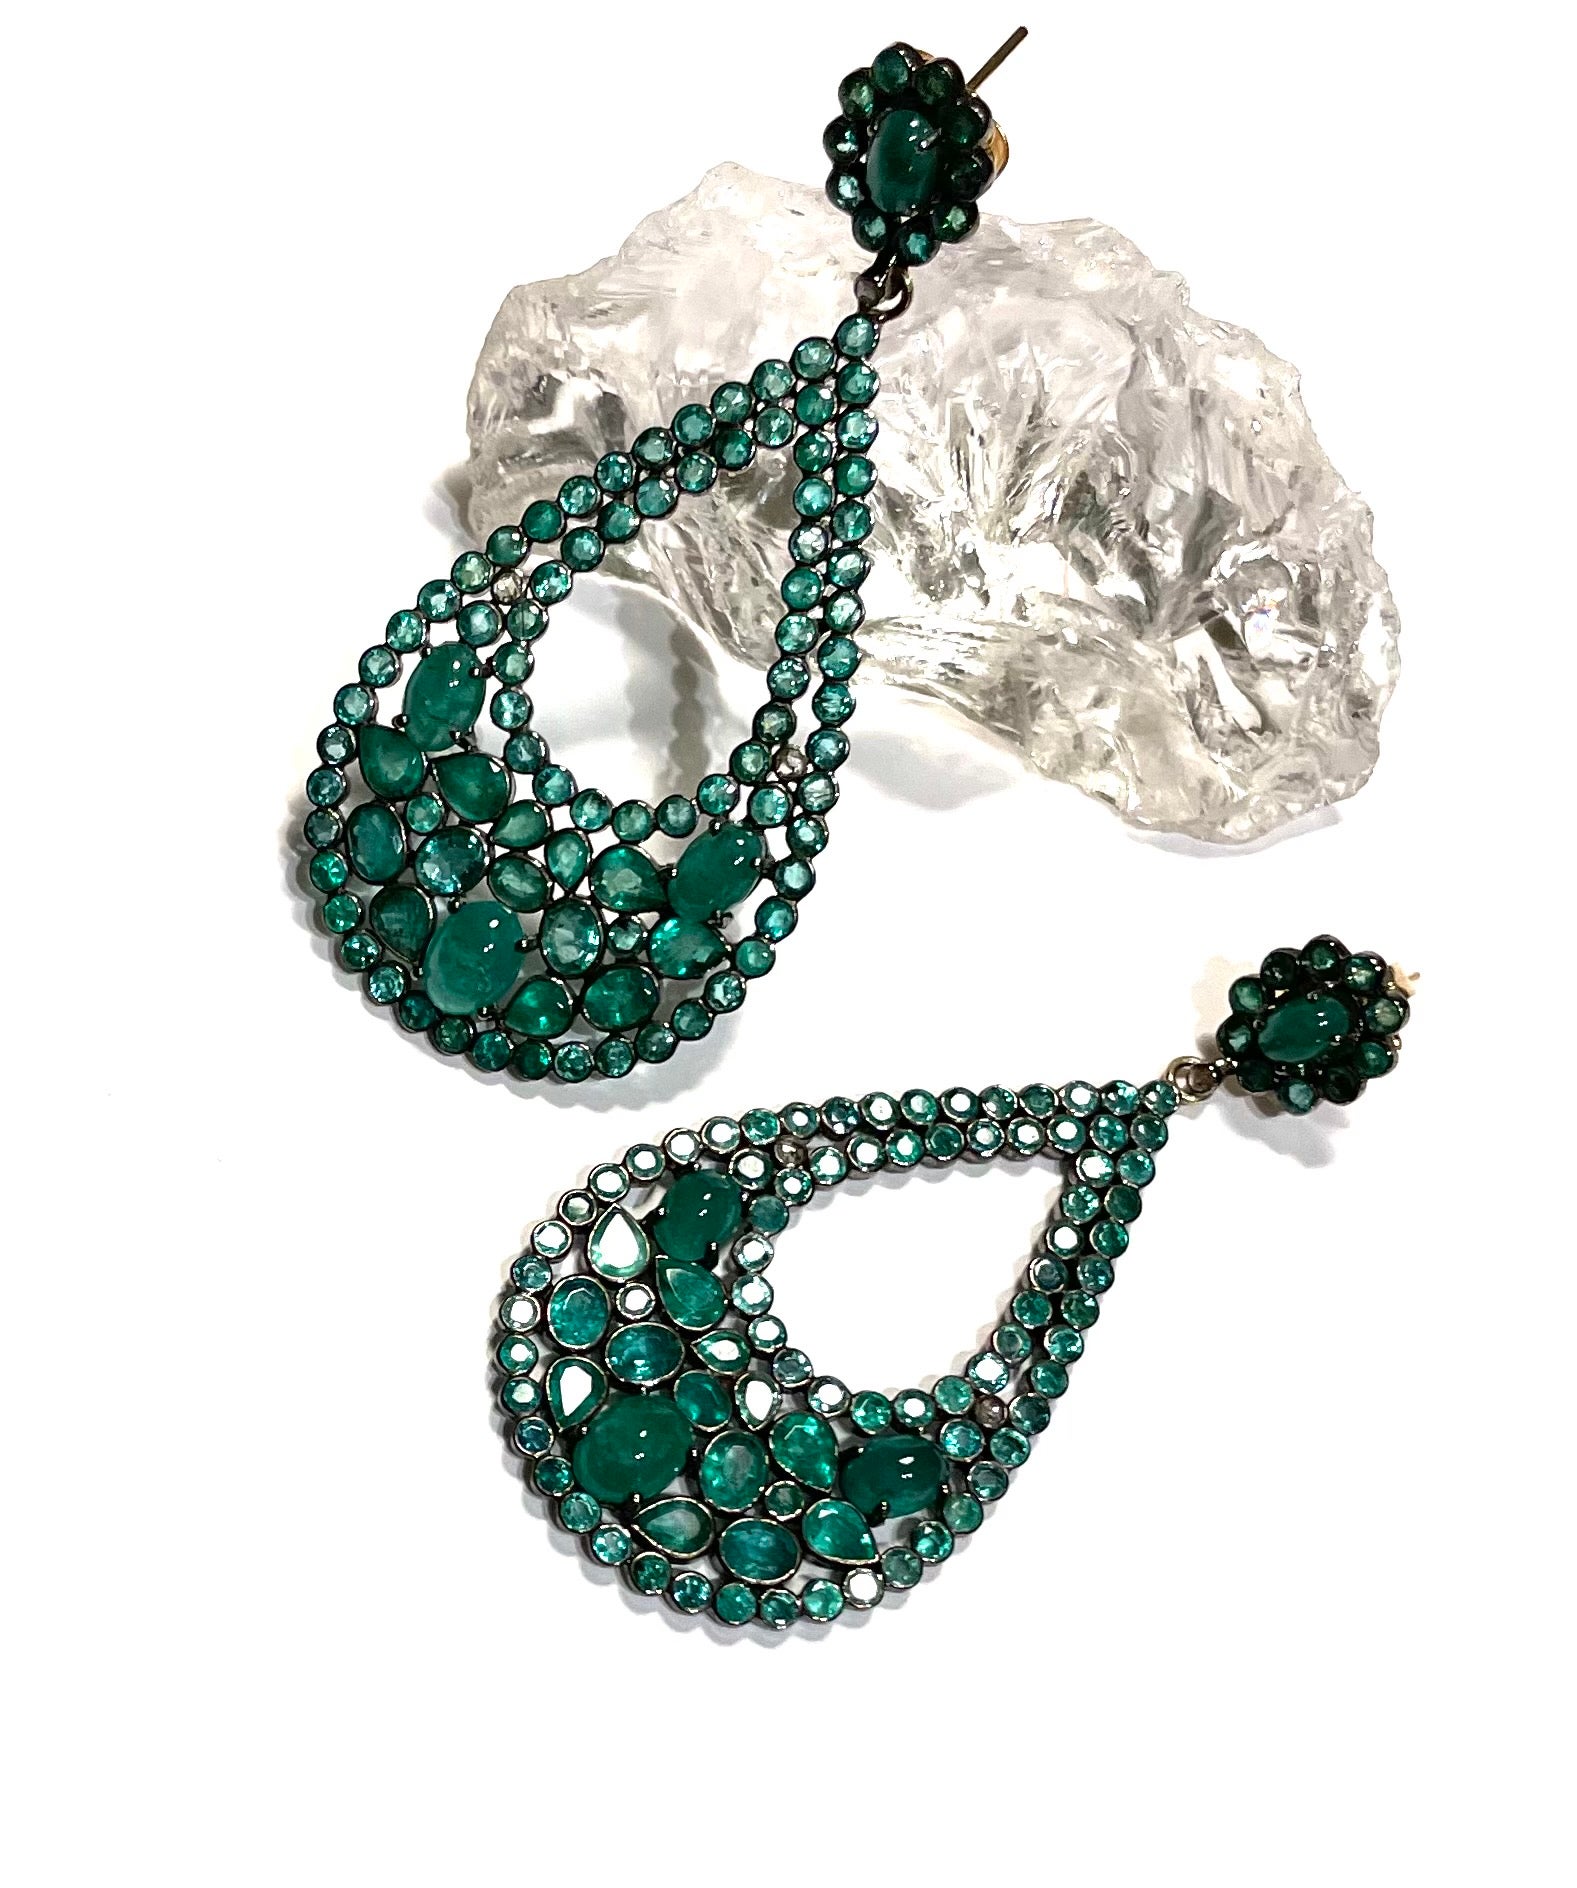 Description
Vibrant 24 carat Columbian Emerald earrings in a feminine pear-shape design, featuring a beautiful mix of  faceted and cabochon shapes and sizes with delicate diamond accents.
Item # E2785

Materials and Weight
Emeralds 24 carats,